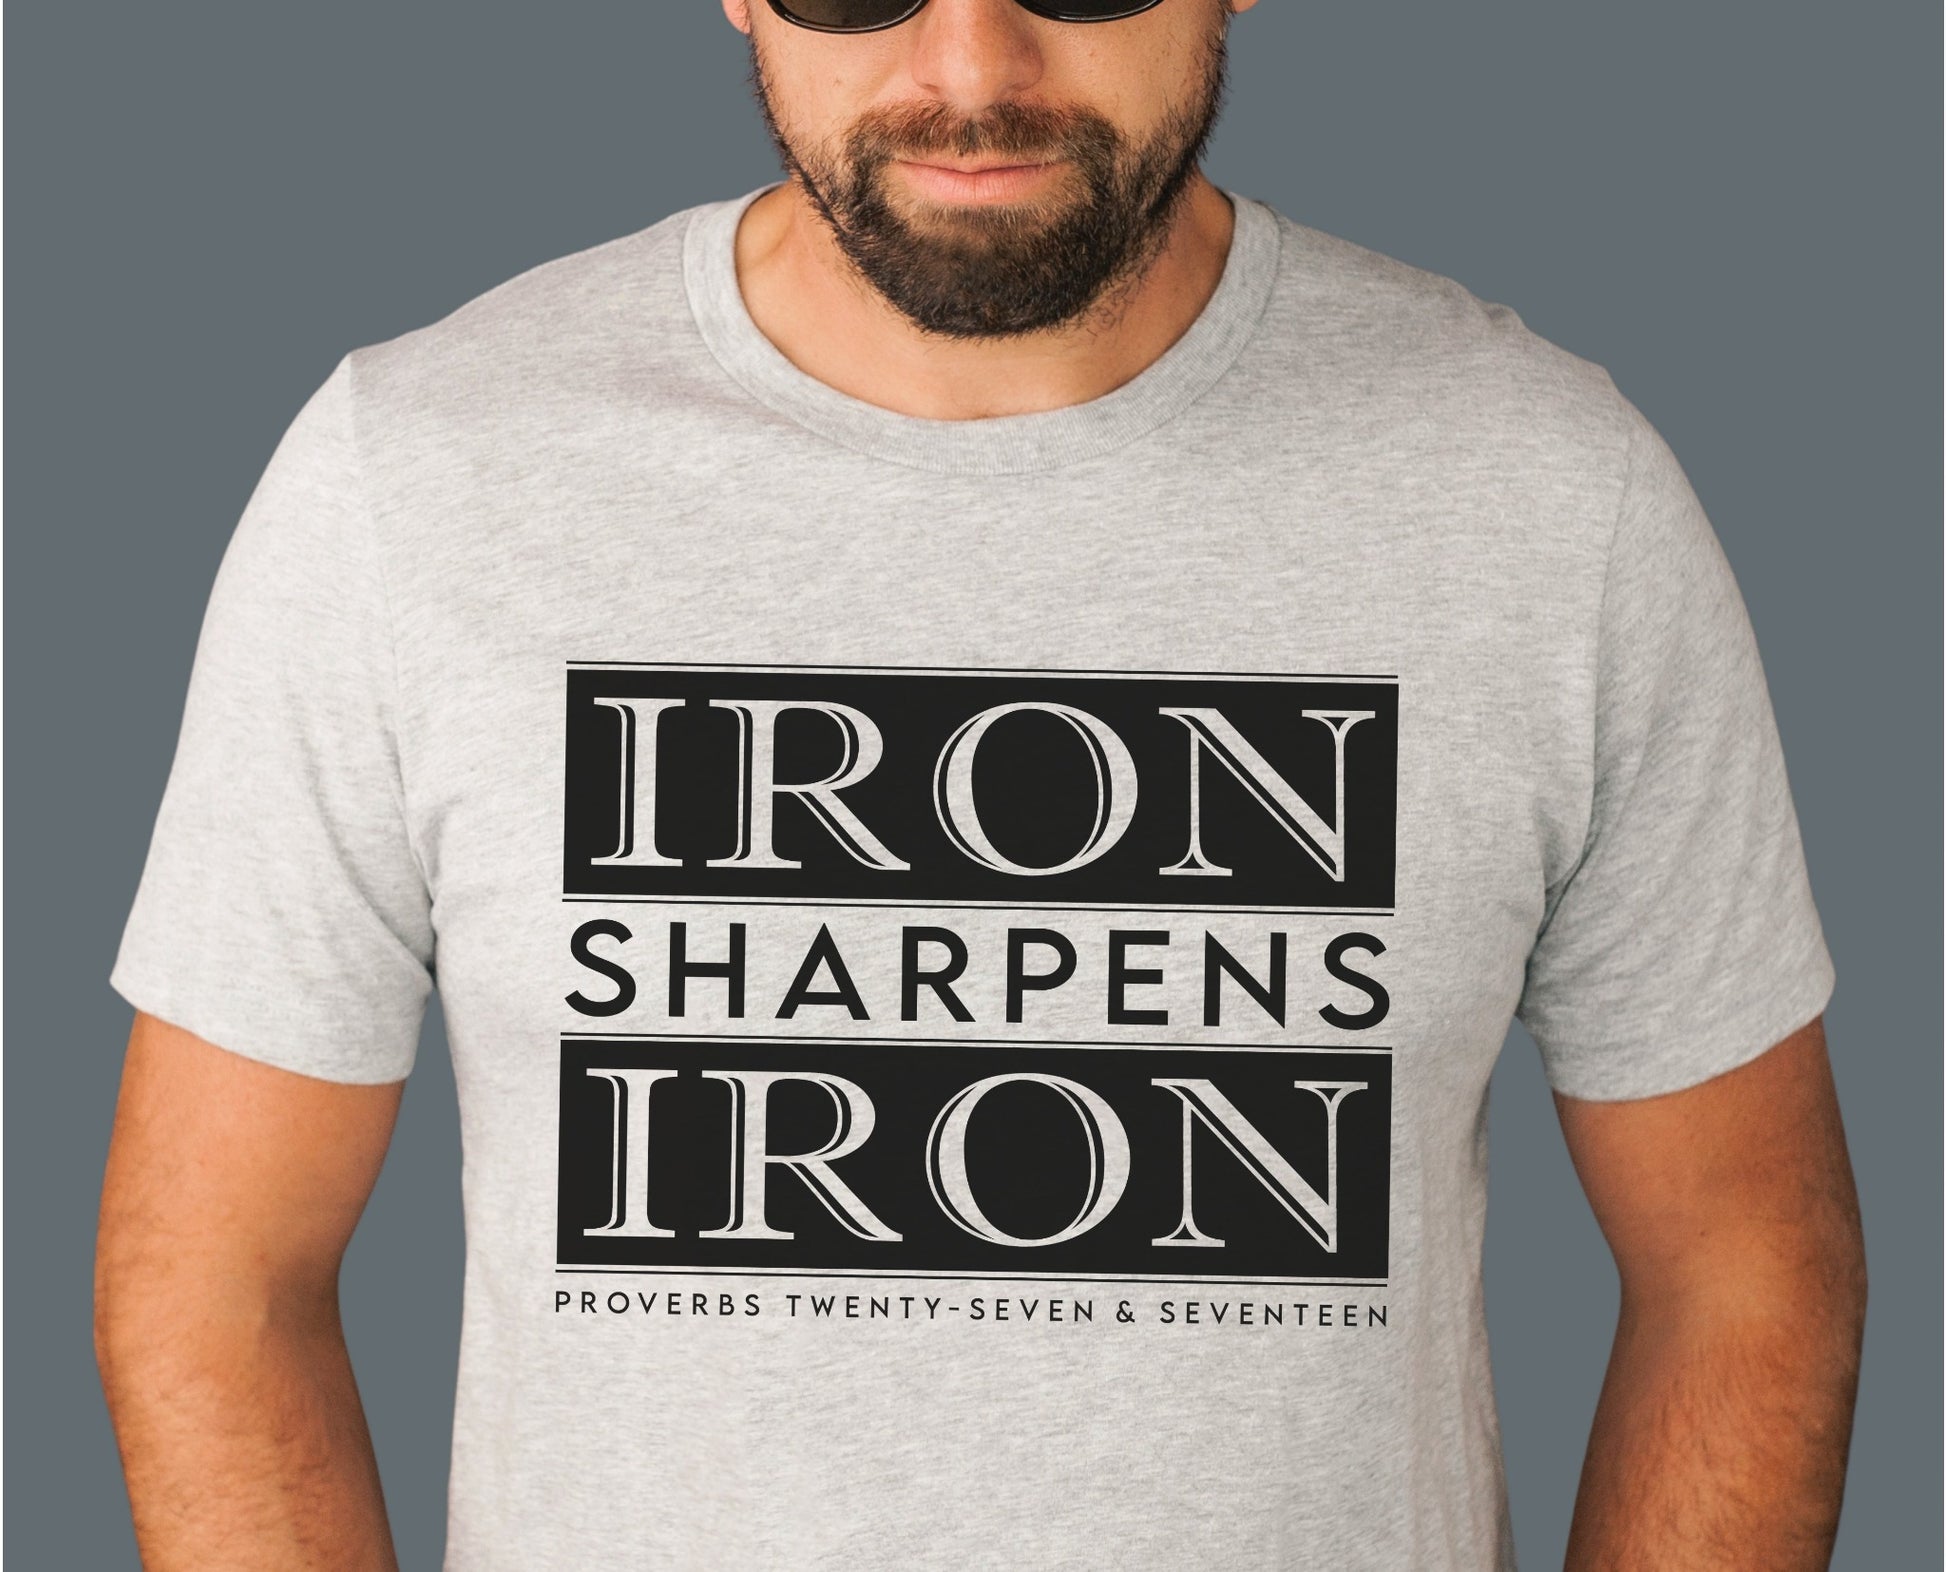 Iron Sharpens Iron Proverbs 27:17 Christian aesthetic block style design printed in black on soft heather gray unisex t-shirt for men's groups